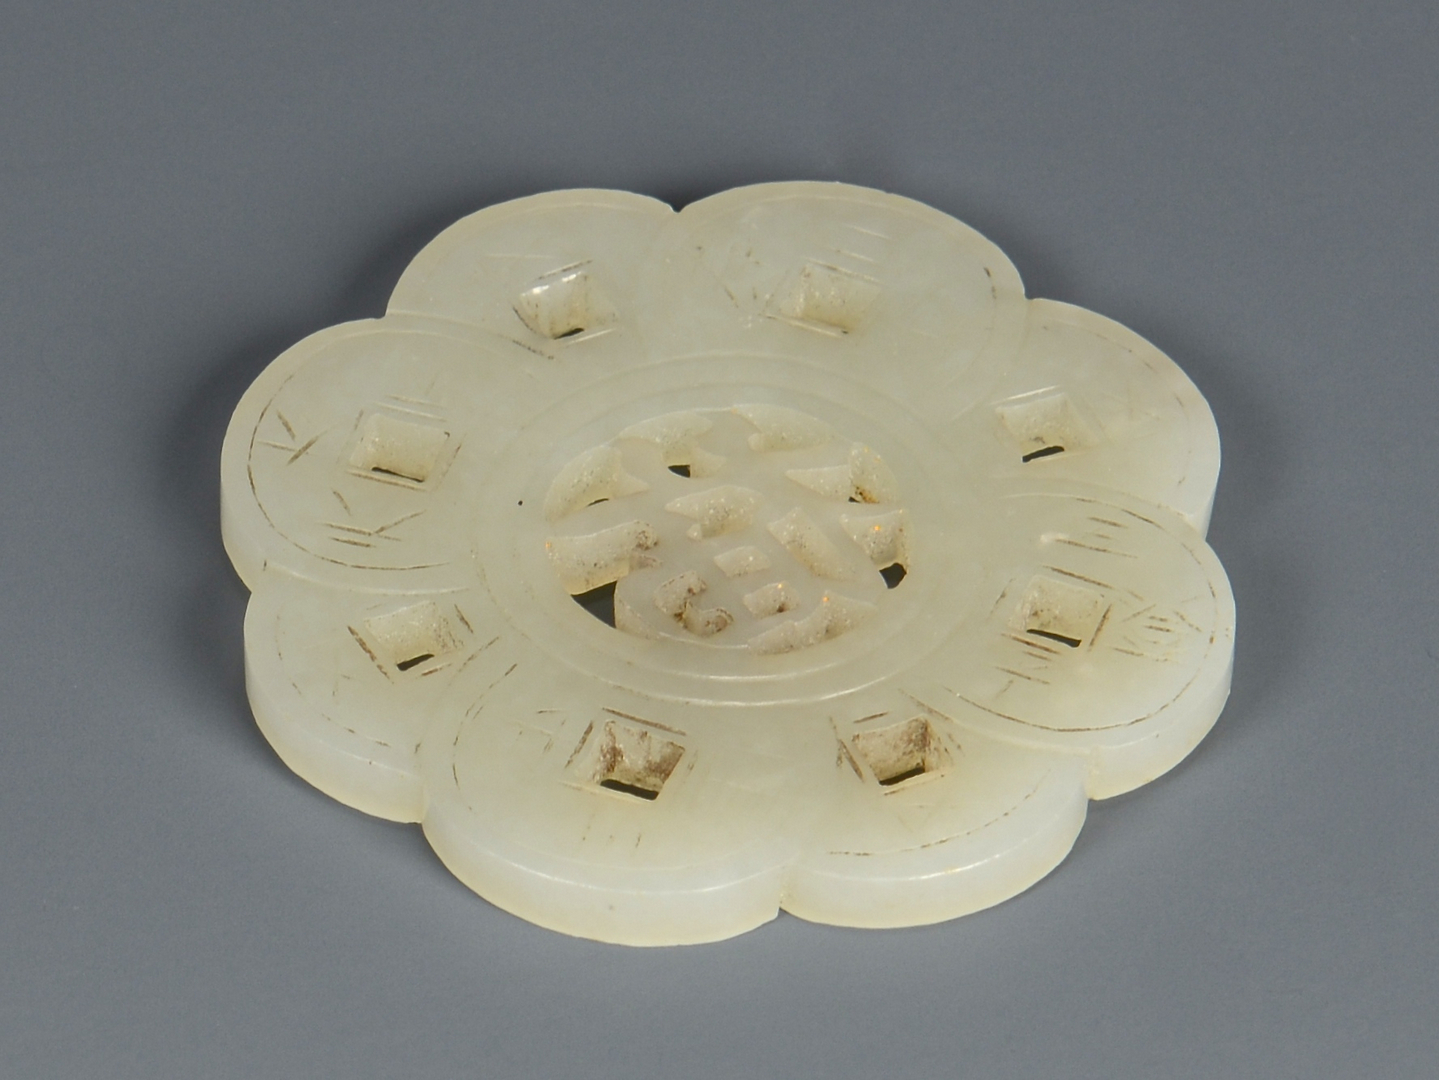 Lot 20: Carved White Jade Disc and Stand